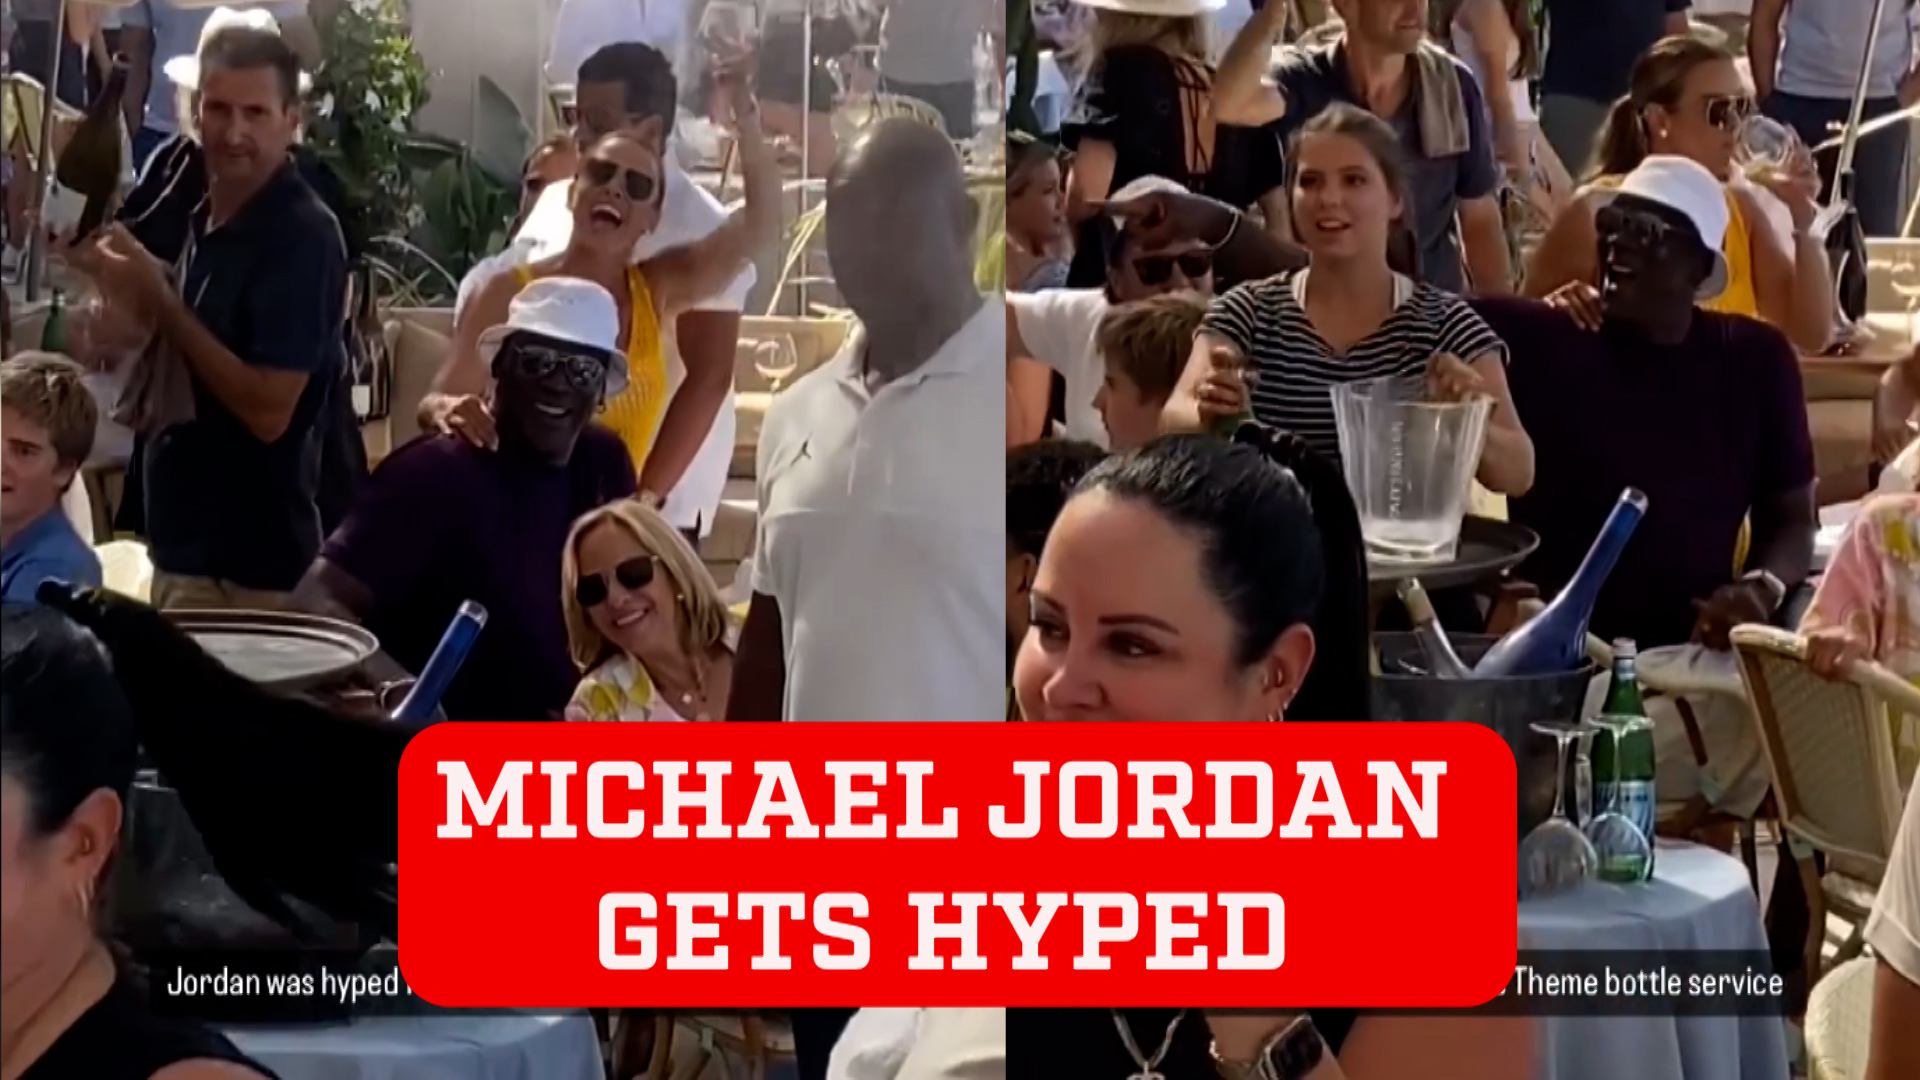 Michael Jordan gets hyped during boozy lunch as restaurant staff play Bulls entrance song